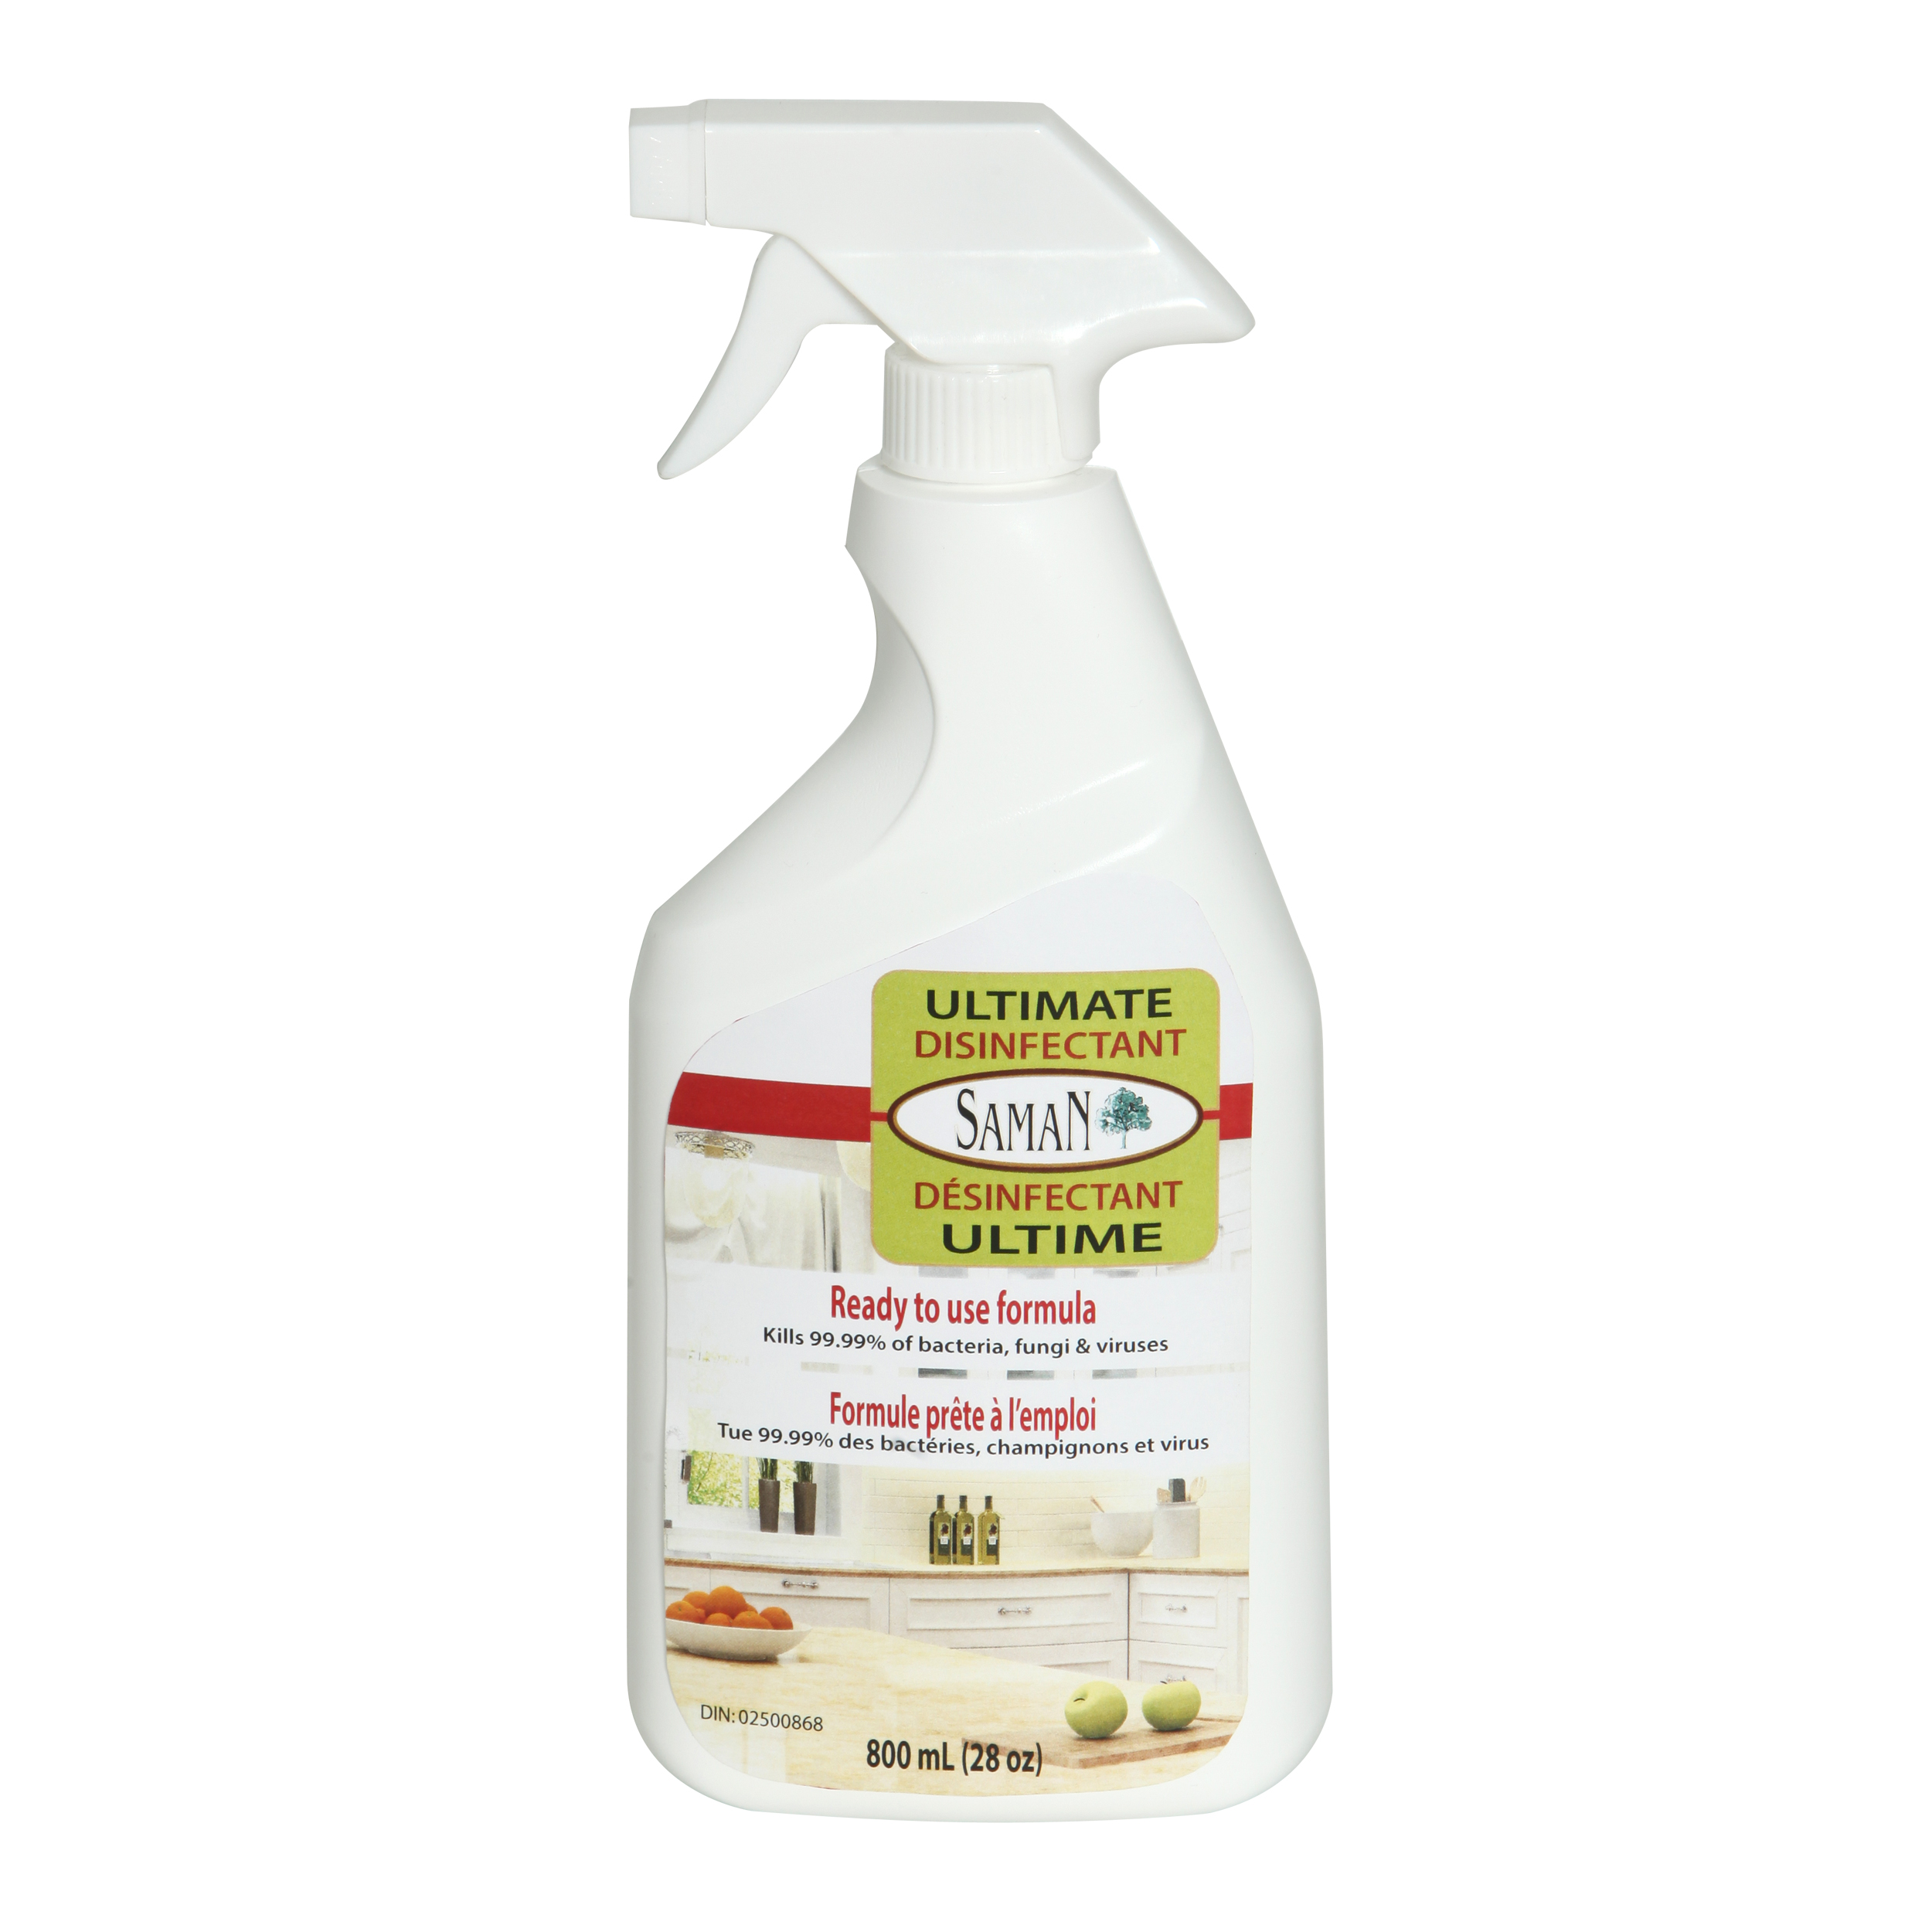 Ultimate all surfaces disinfectant - 28oz SamaN